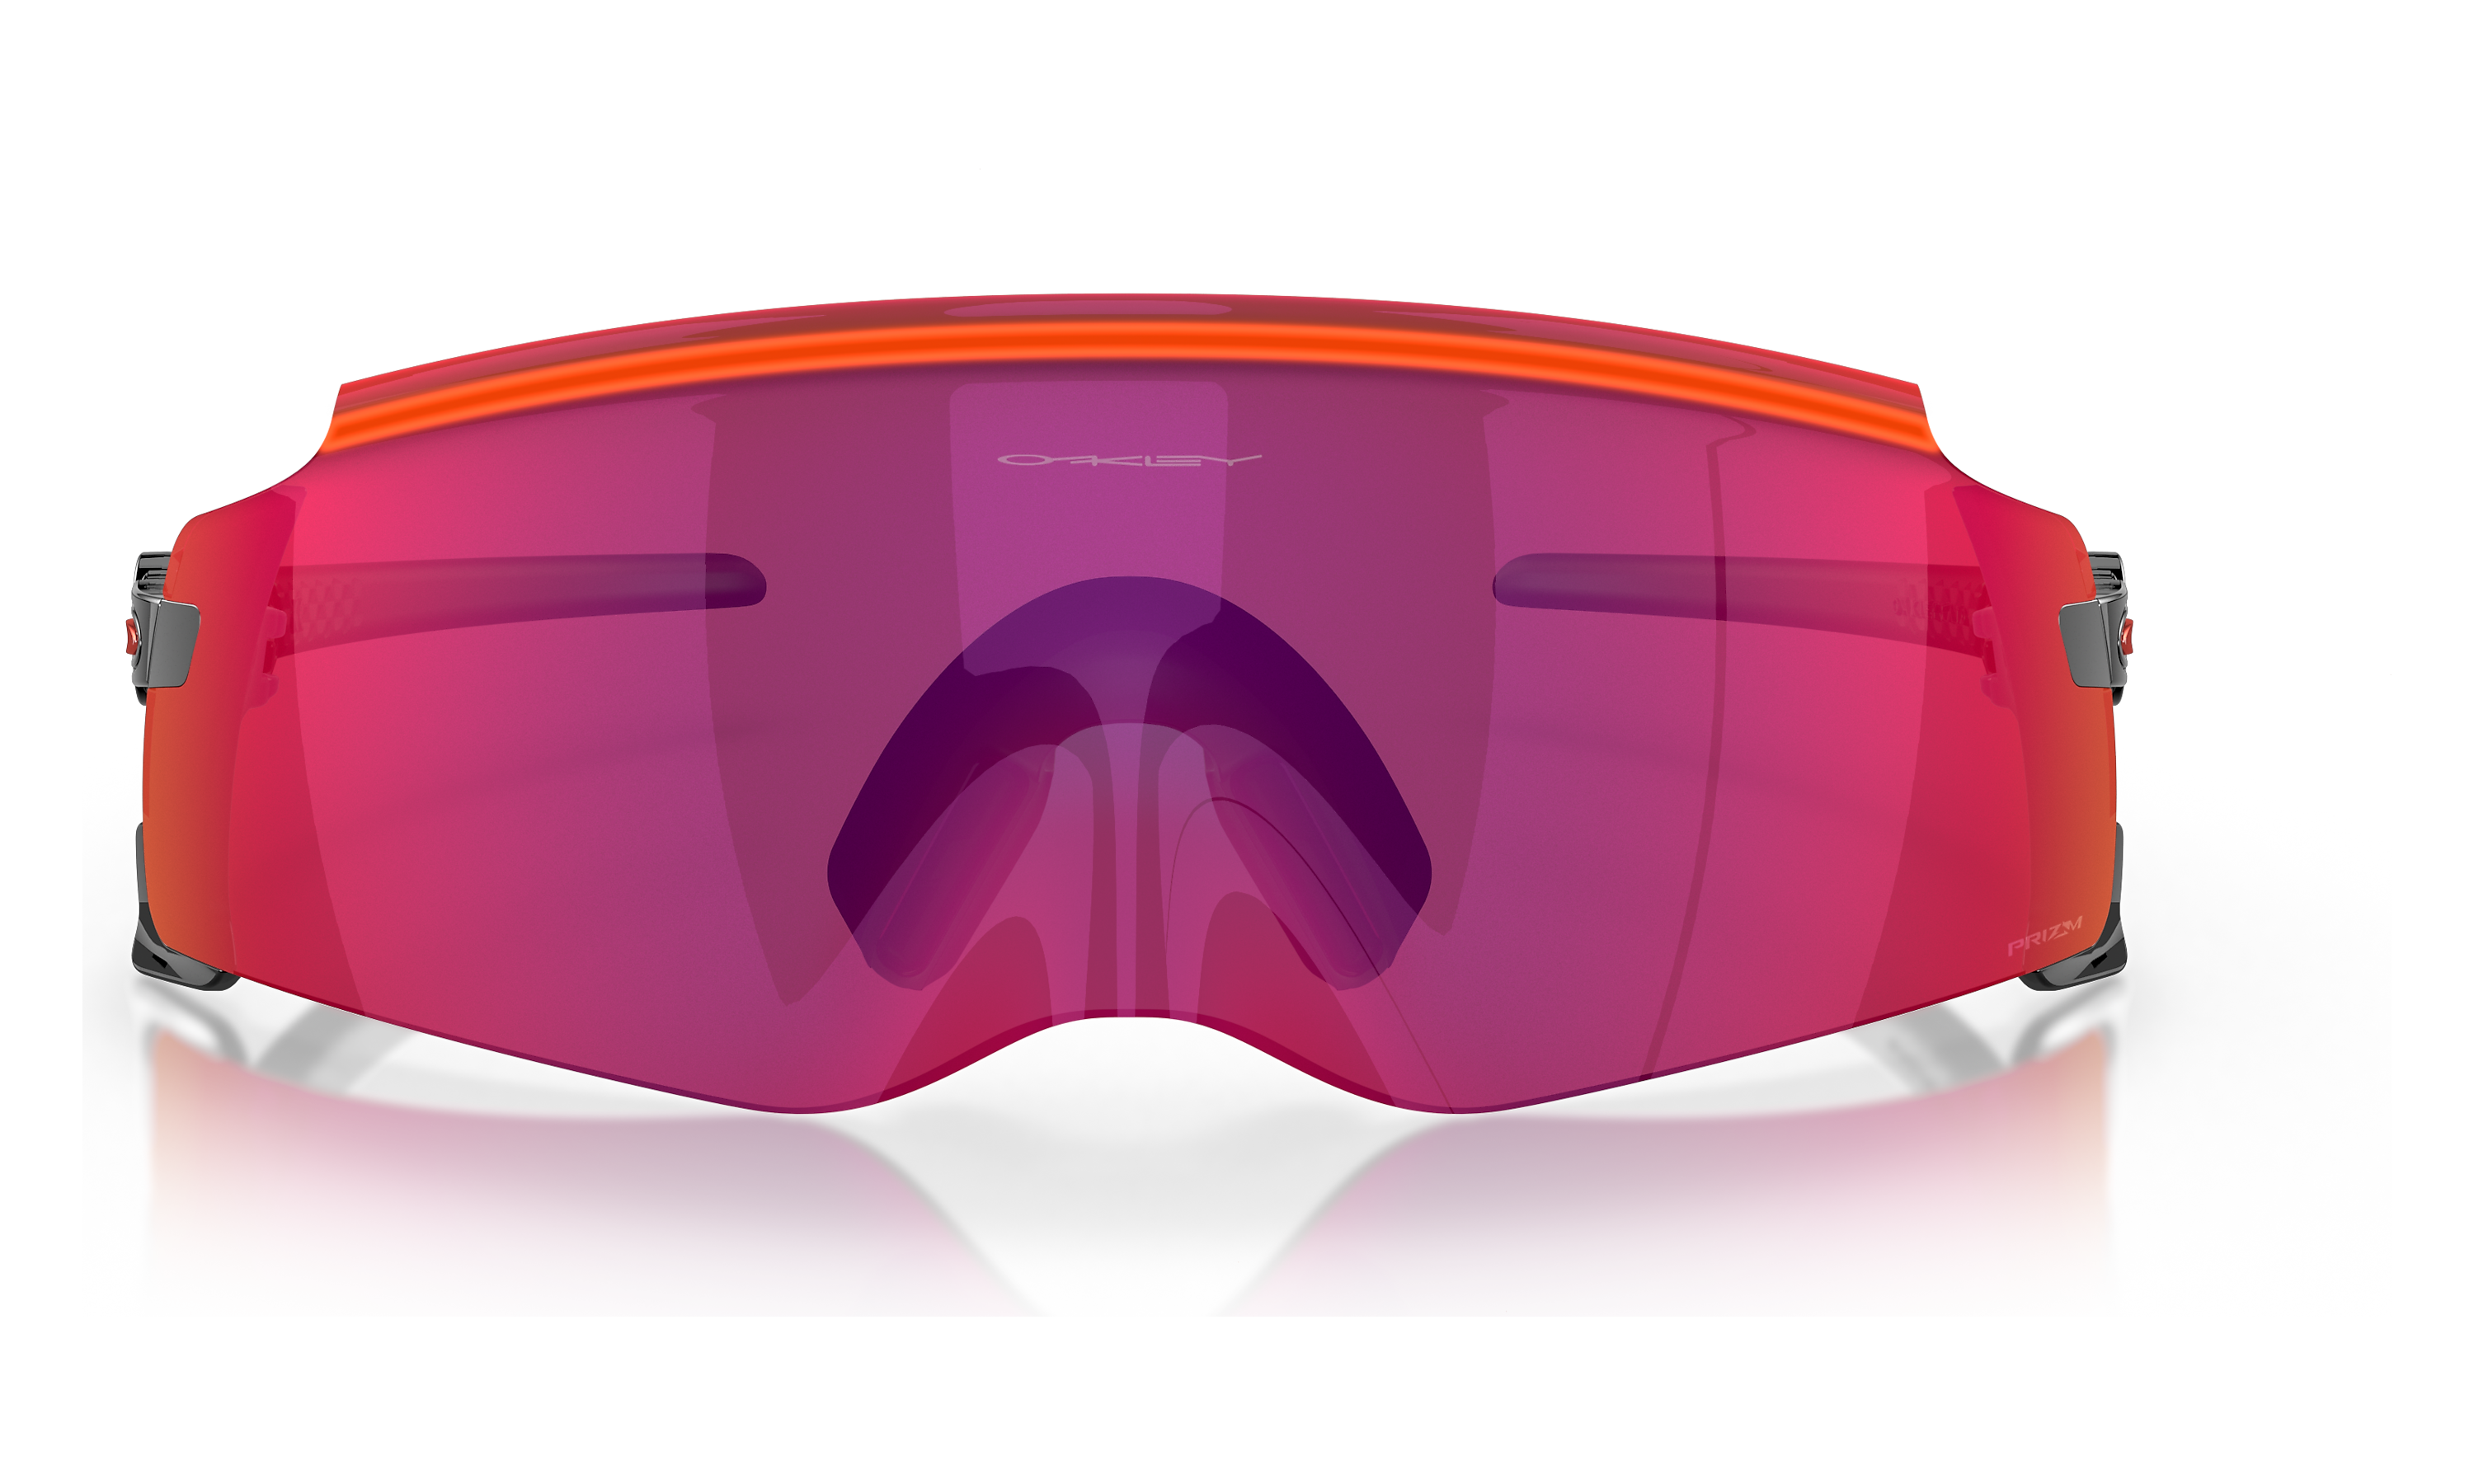 Shipping timeframe for Oakley products